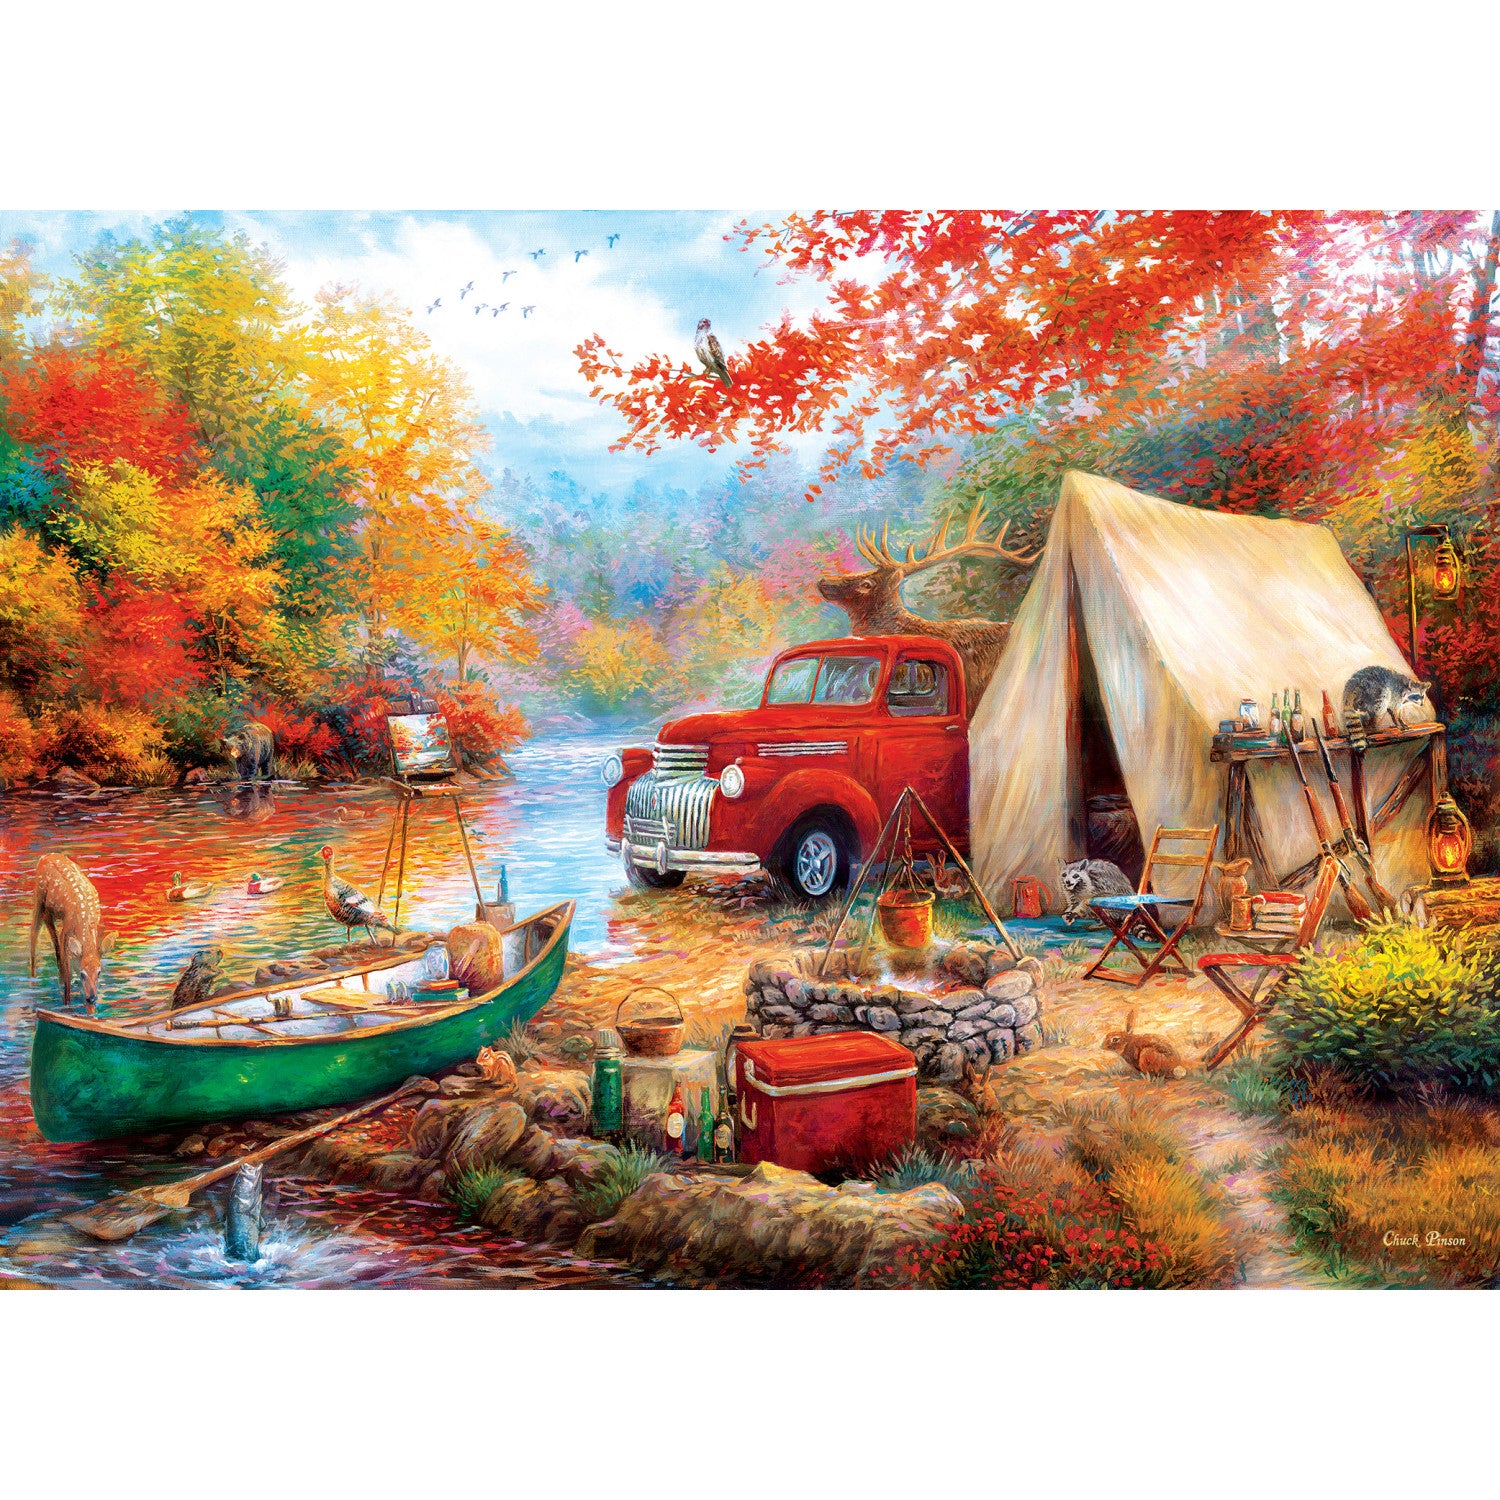 Art Gallery - Share the Outdoors 1000 Piece Puzzle